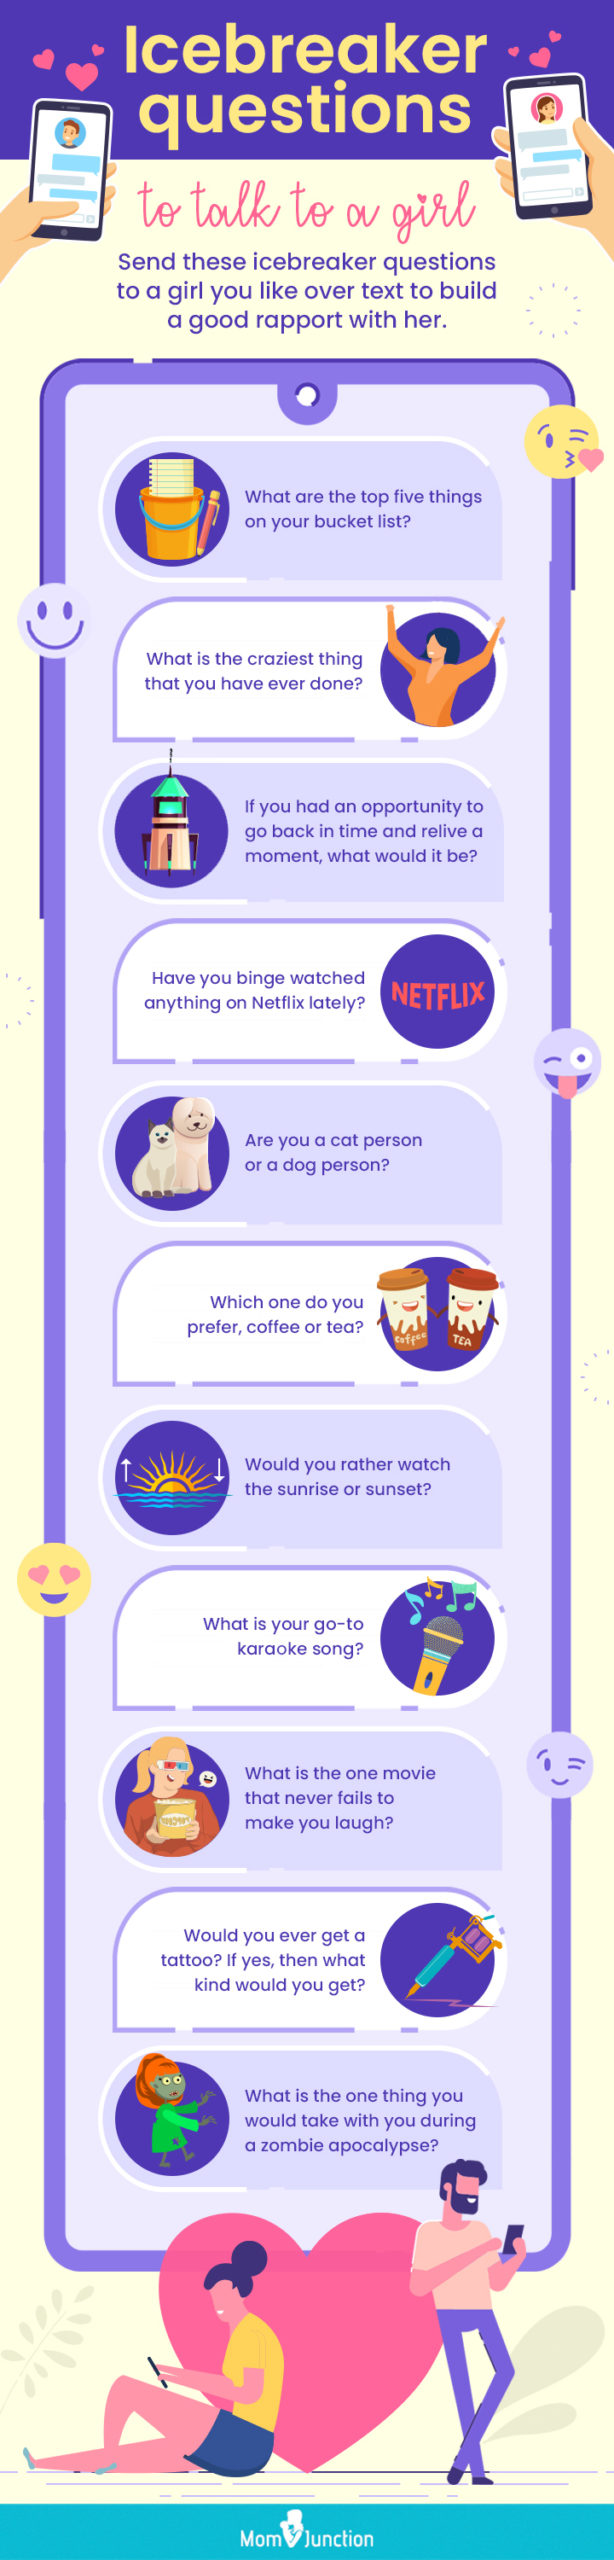 icebreaker questions to talk to a girl [infographic]